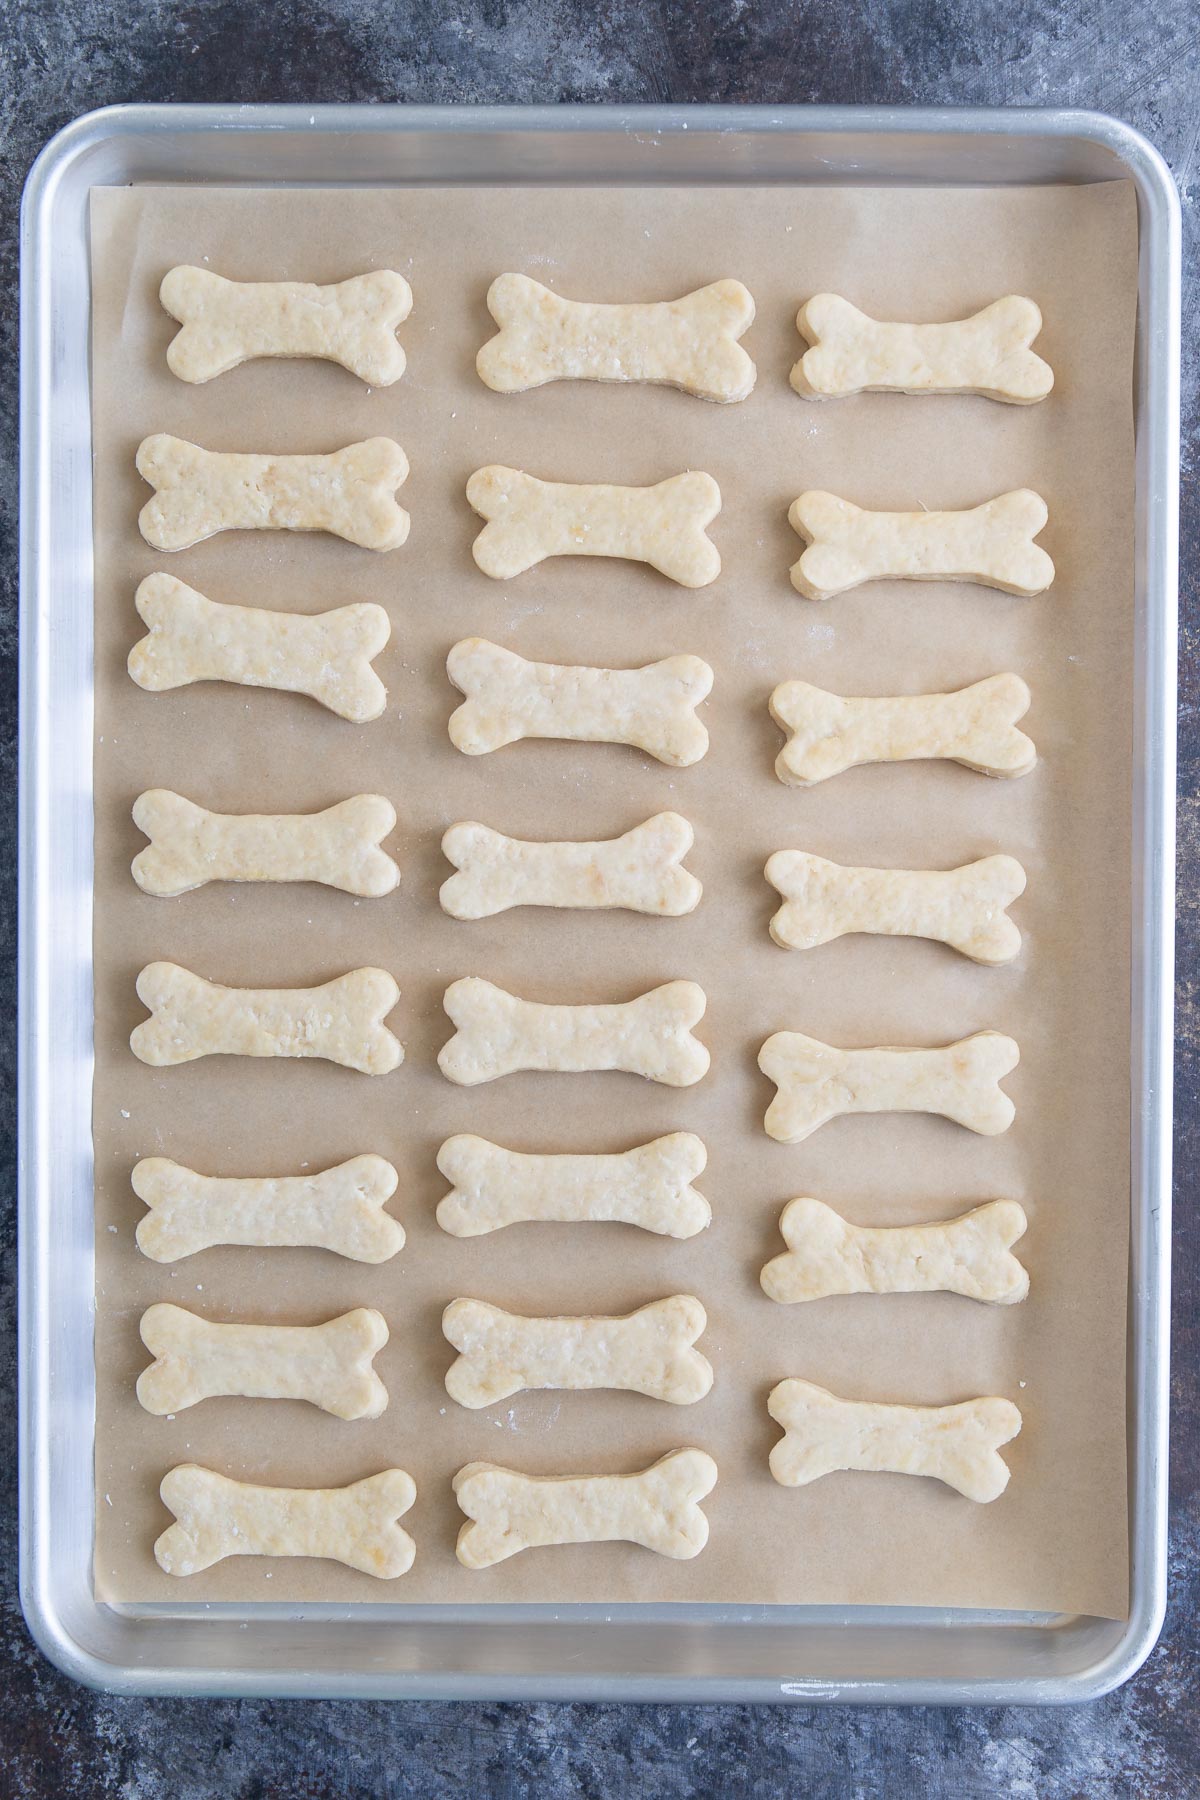 Overhead view of baked dog biscuits on a baking sheet lined with parchment paper.